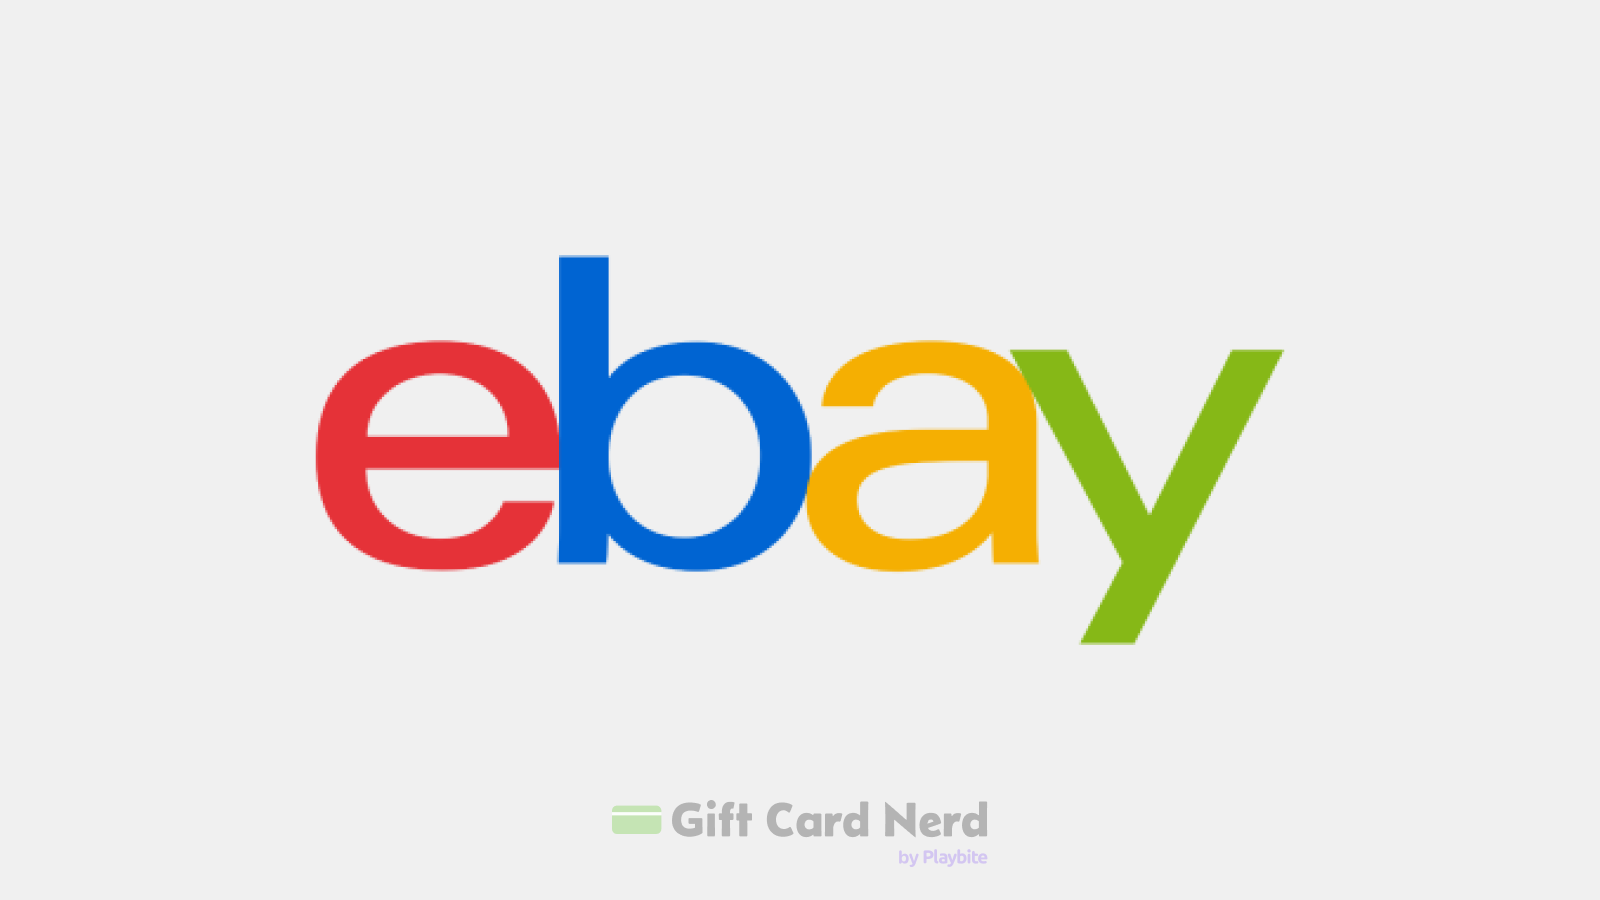 Does Walmart Sell eBay Gift Cards?